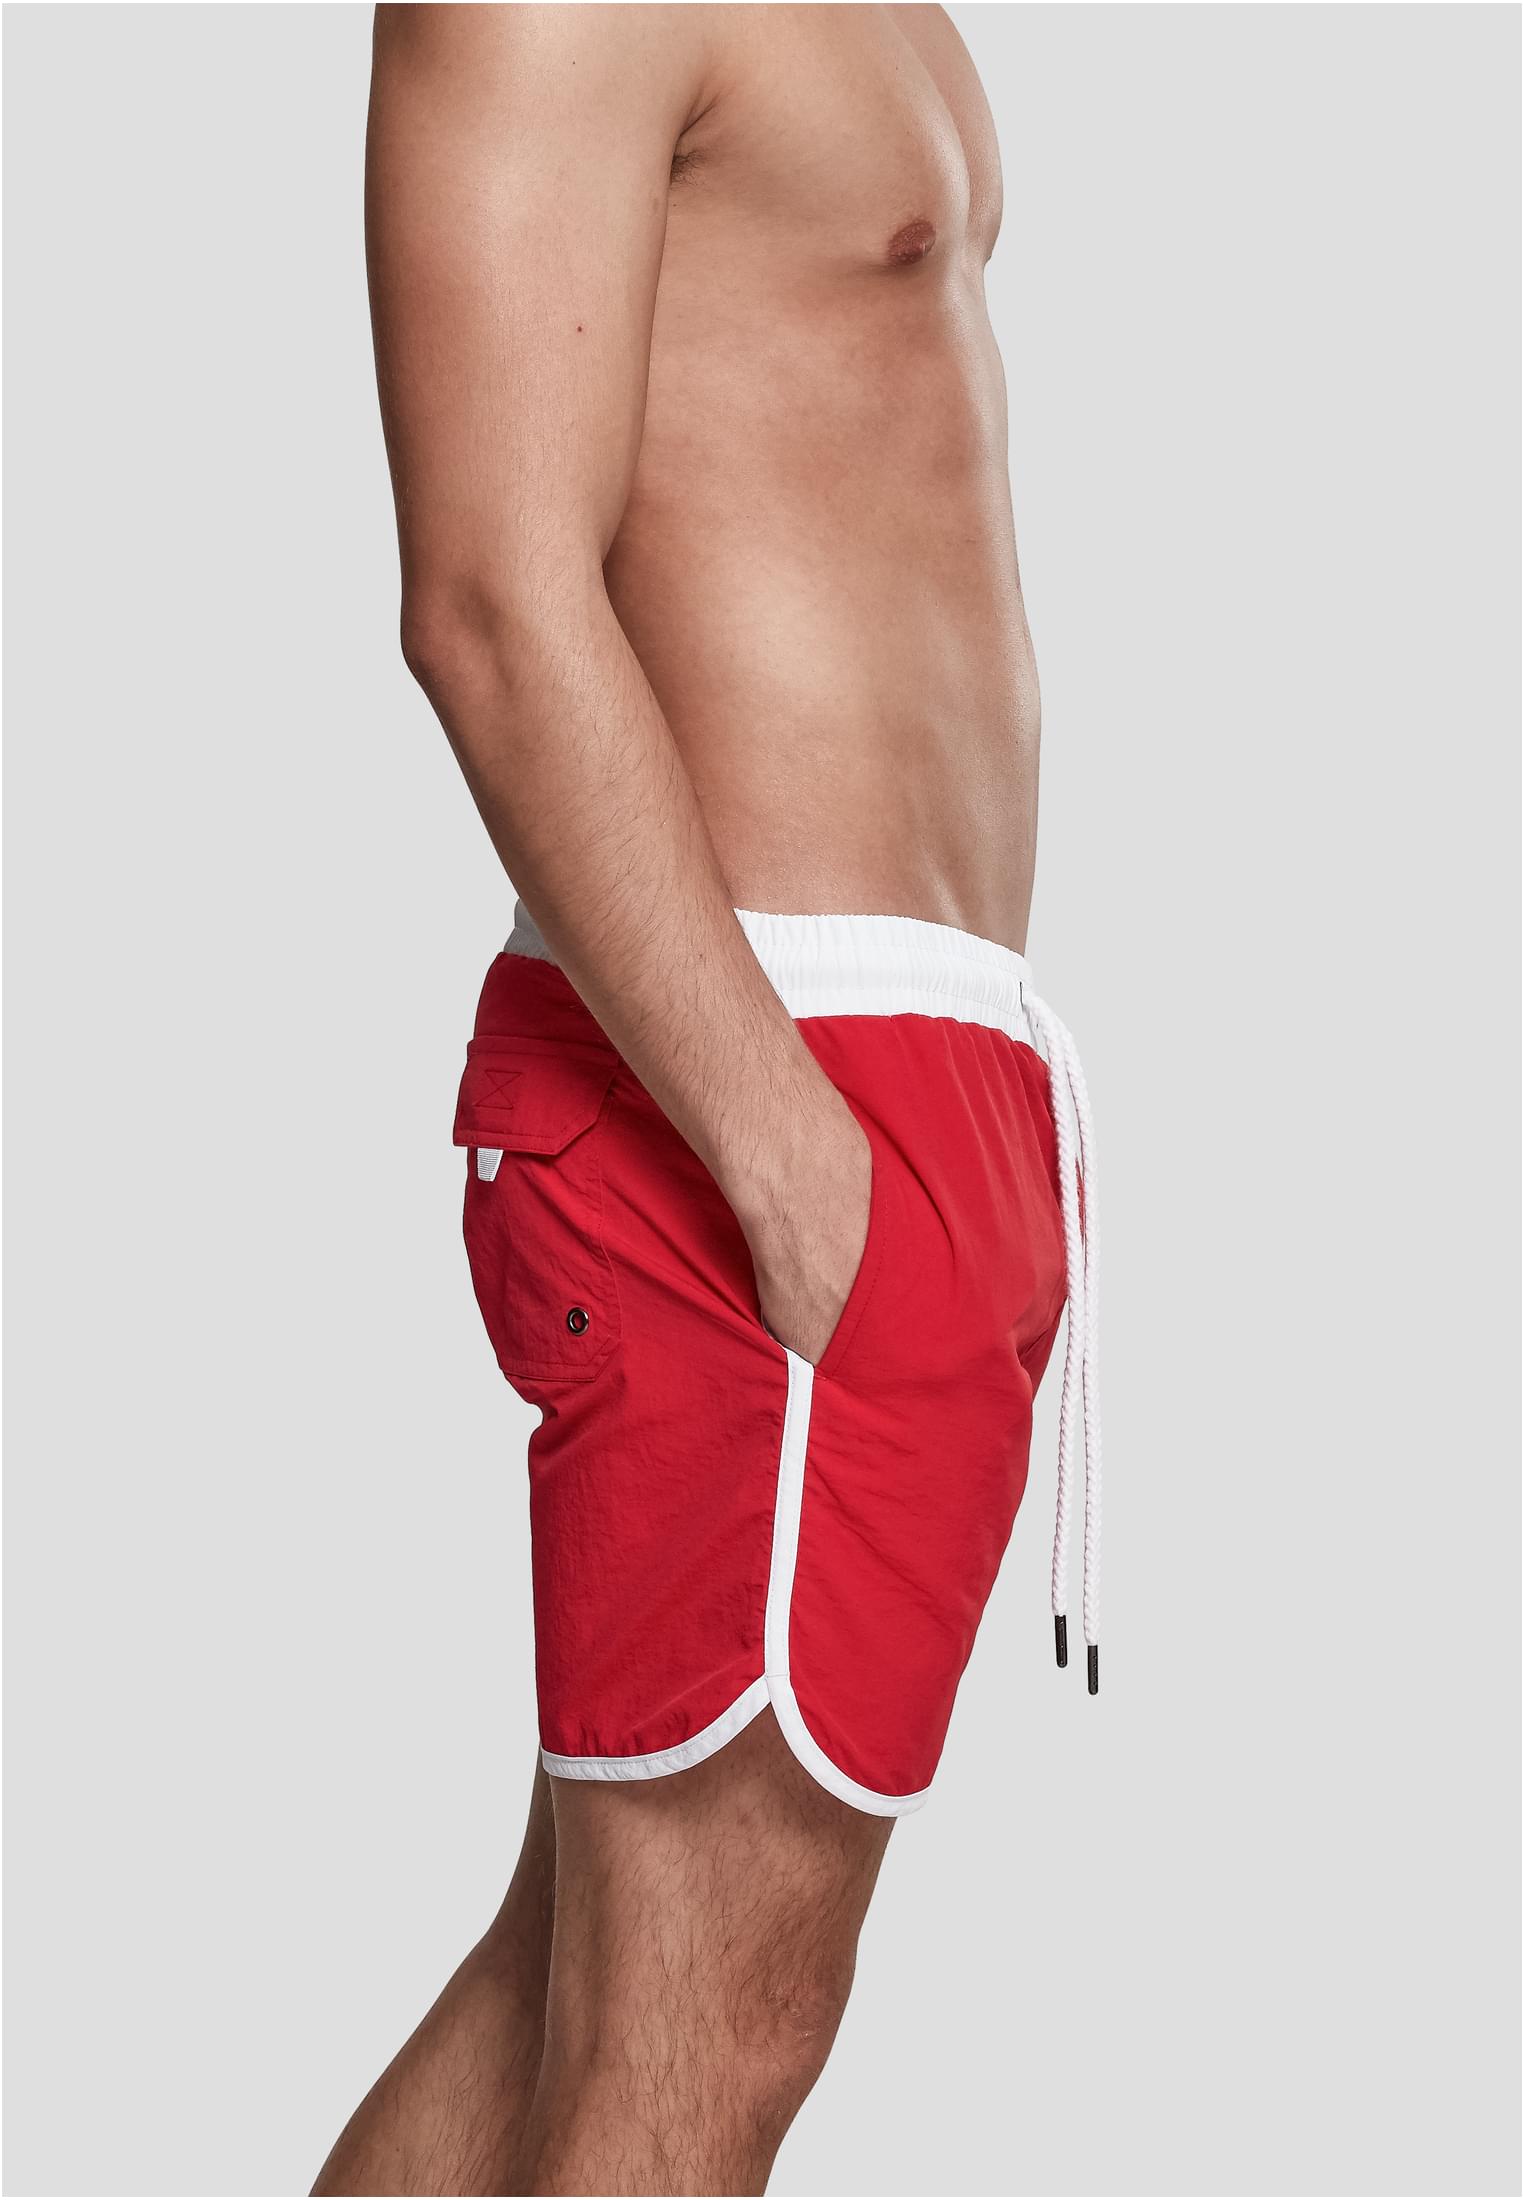 Plus Size Retro Swimshorts in Farbe firered/white